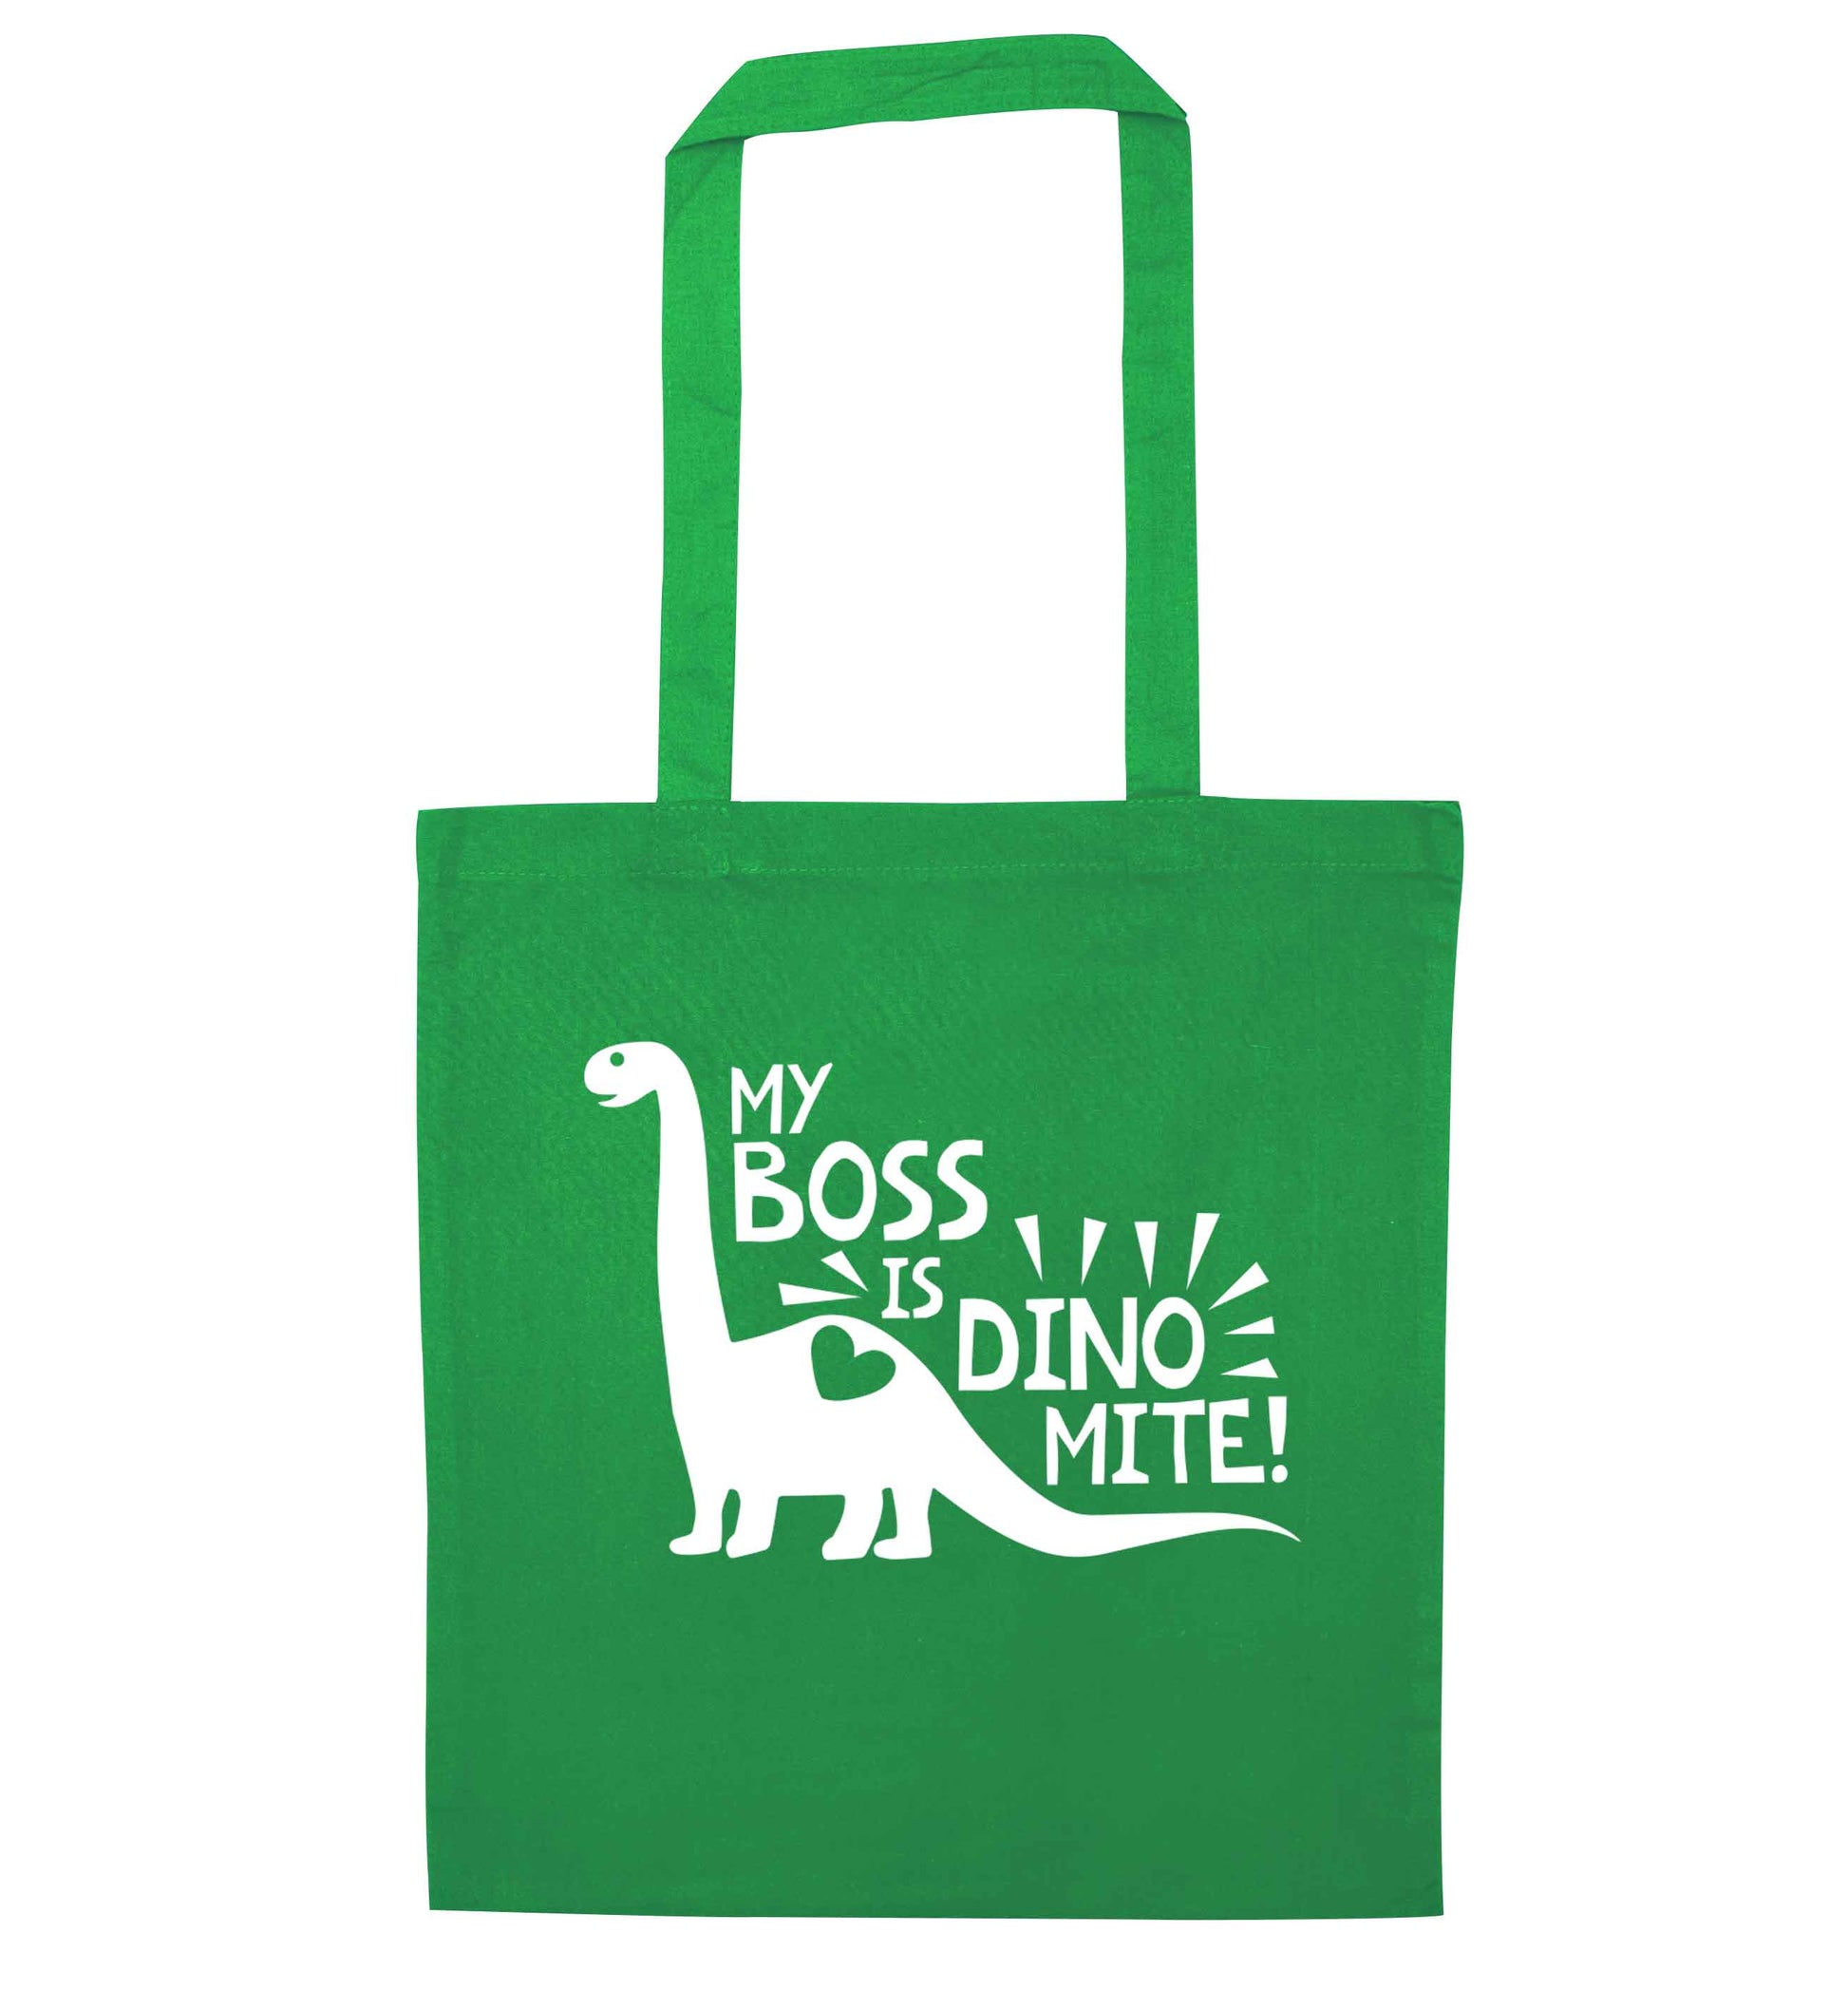 My boss is dinomite! green tote bag